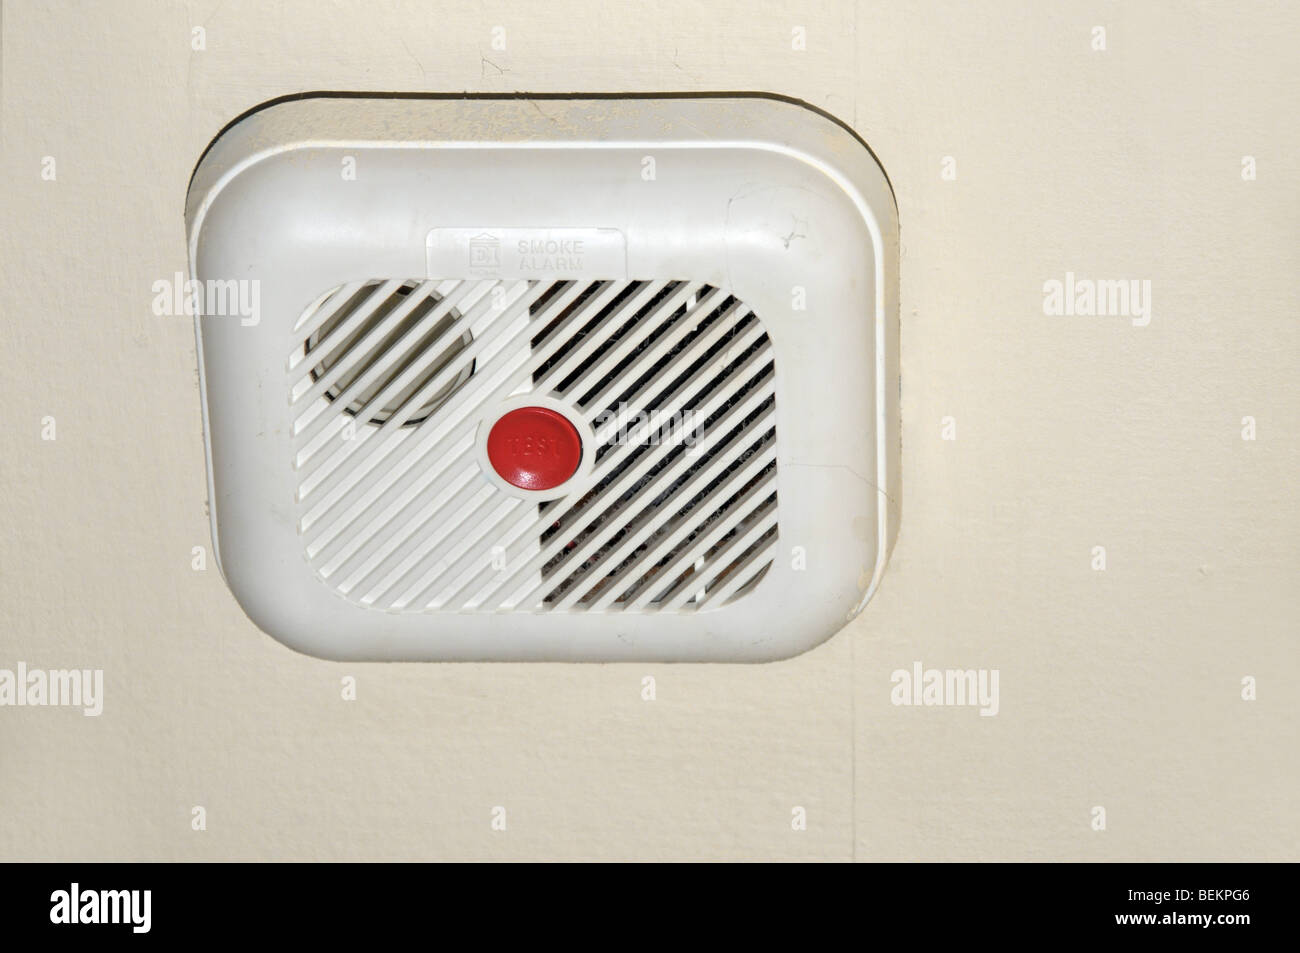 A smoke detector positioned on the ceiling of a house. Stock Photo